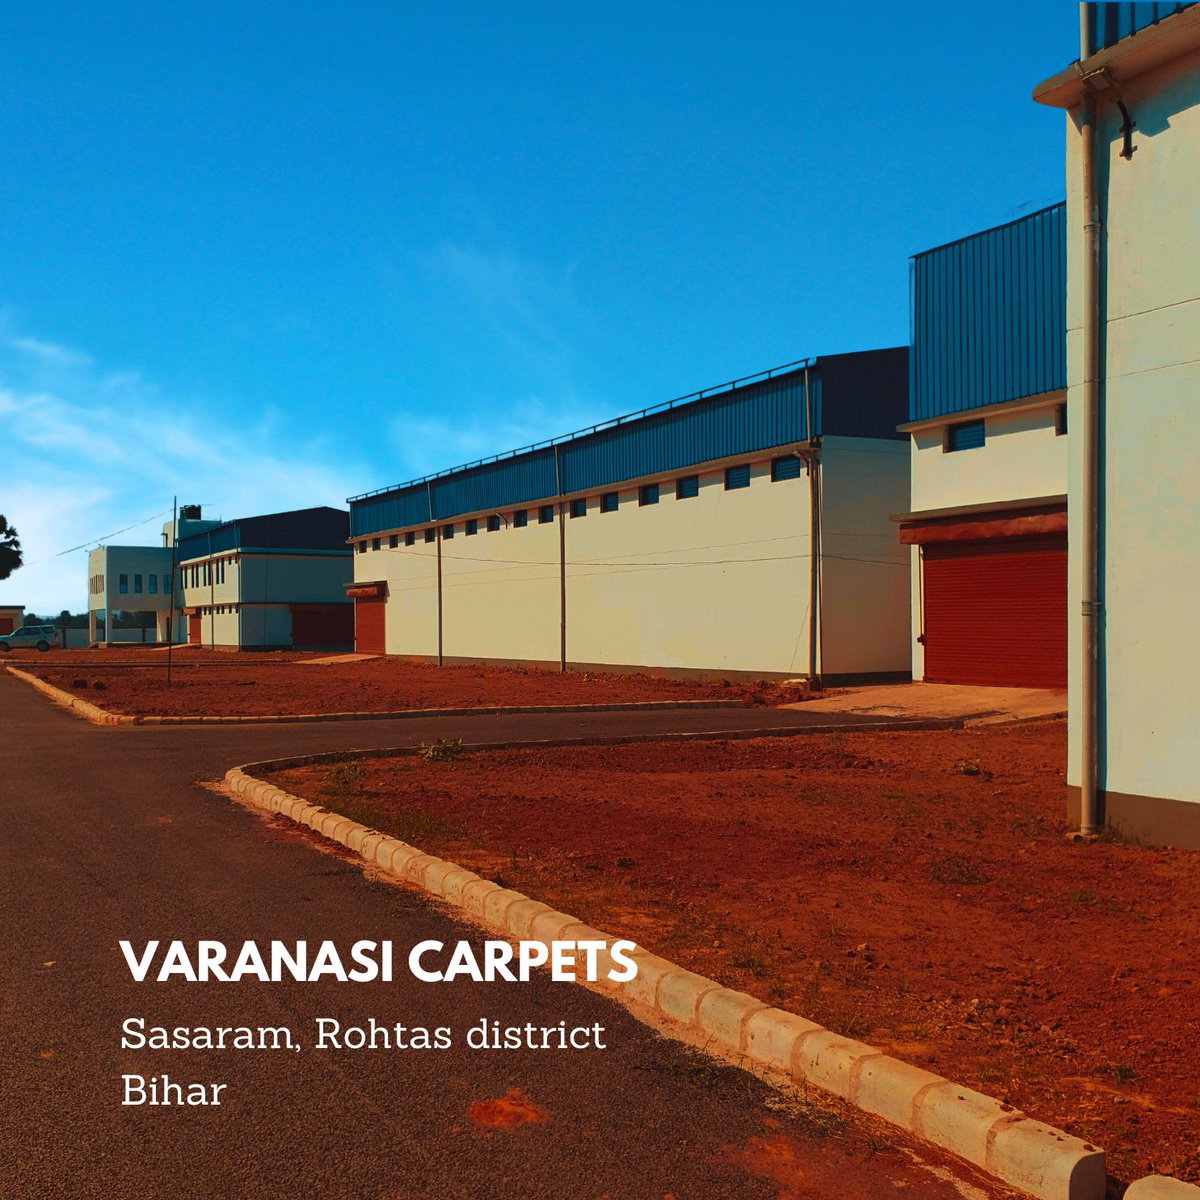 India's top carpet maker, Varanasi Carpets, chose Bihar to extend its manufacturing setup for home textiles. They are setting up this new facility in Sasaram, Rohtas district. 

@BIADAbihar is supporting this venture by providing pre-built industrial space for the unit.